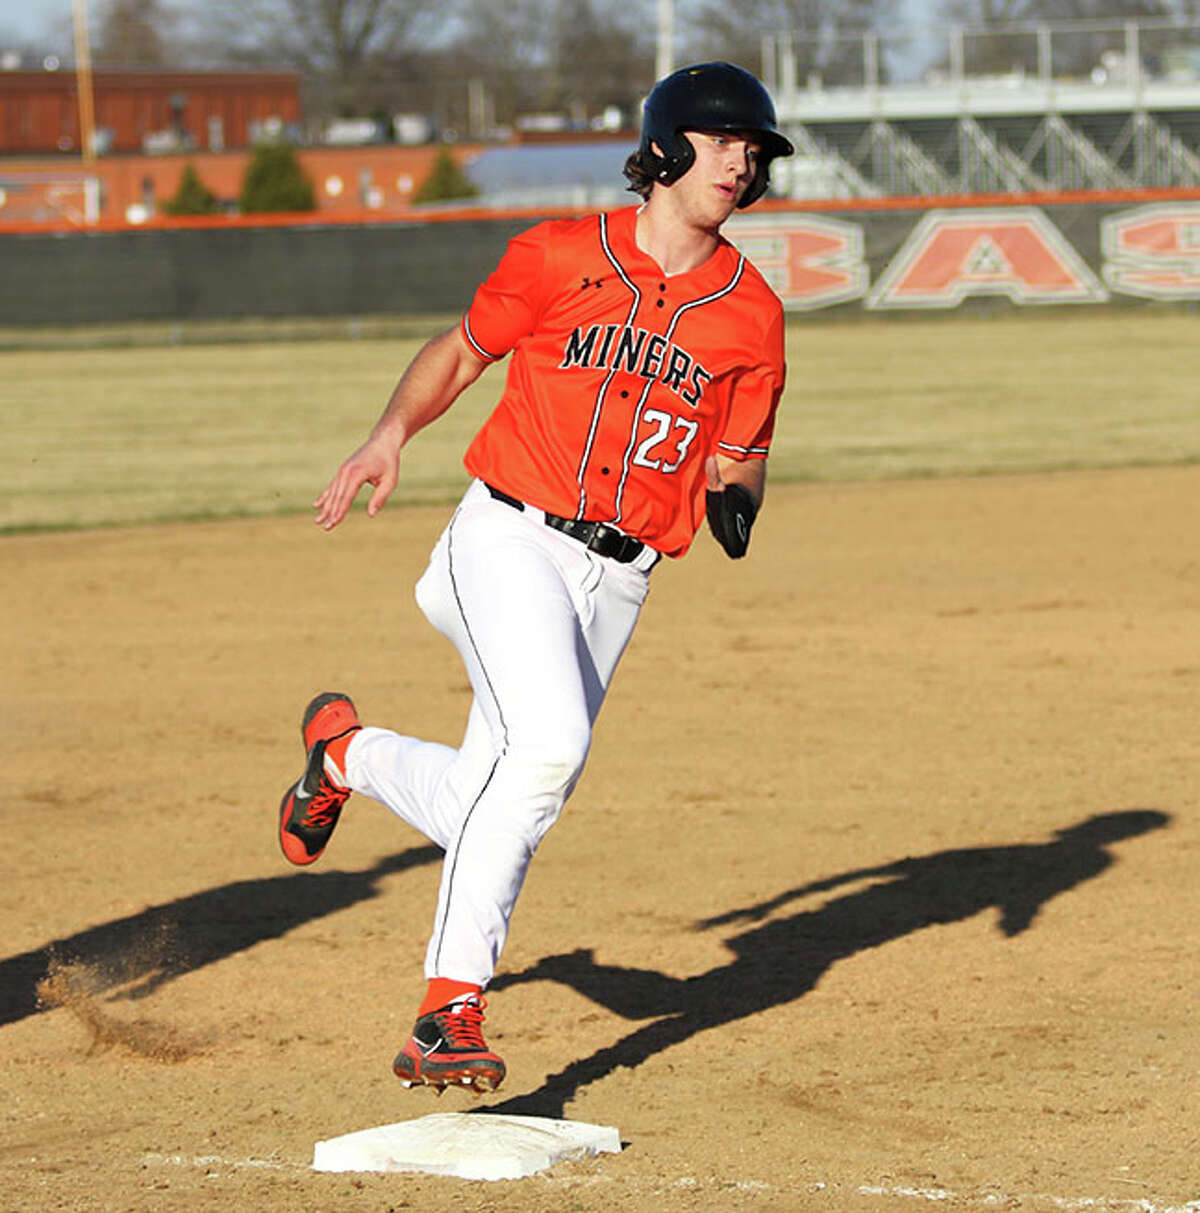 Gillespie's Kamryn Link, shown scoring a run in a game earlier this season in Gillespie, scored four runs in his four-hit day Monday in the Miners' win at Auburn.